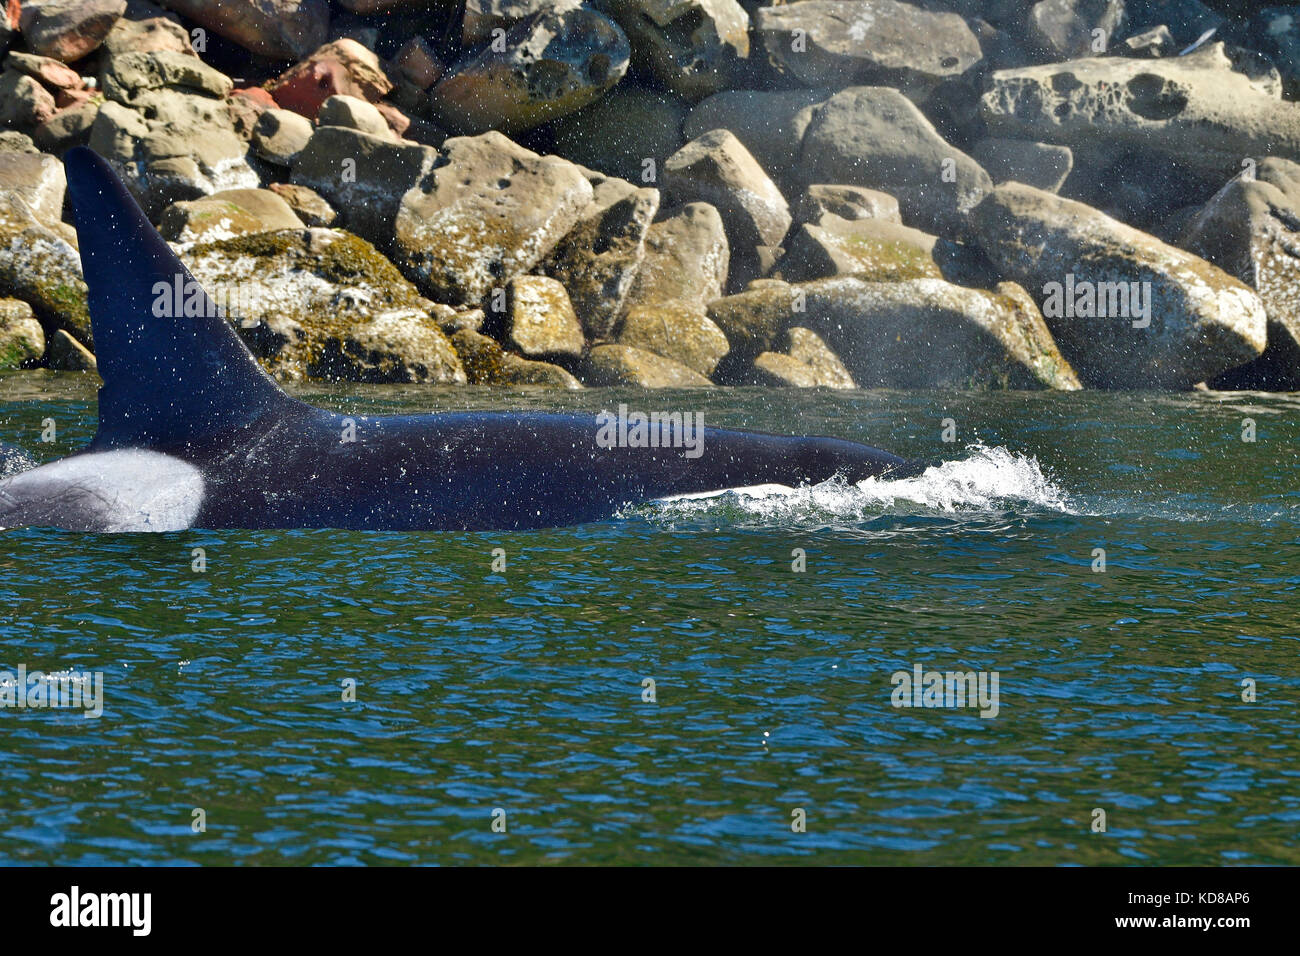 An adult killer whale (Orcinus orca); swimming close to shore on Vancouver Island B.C. Stock Photo